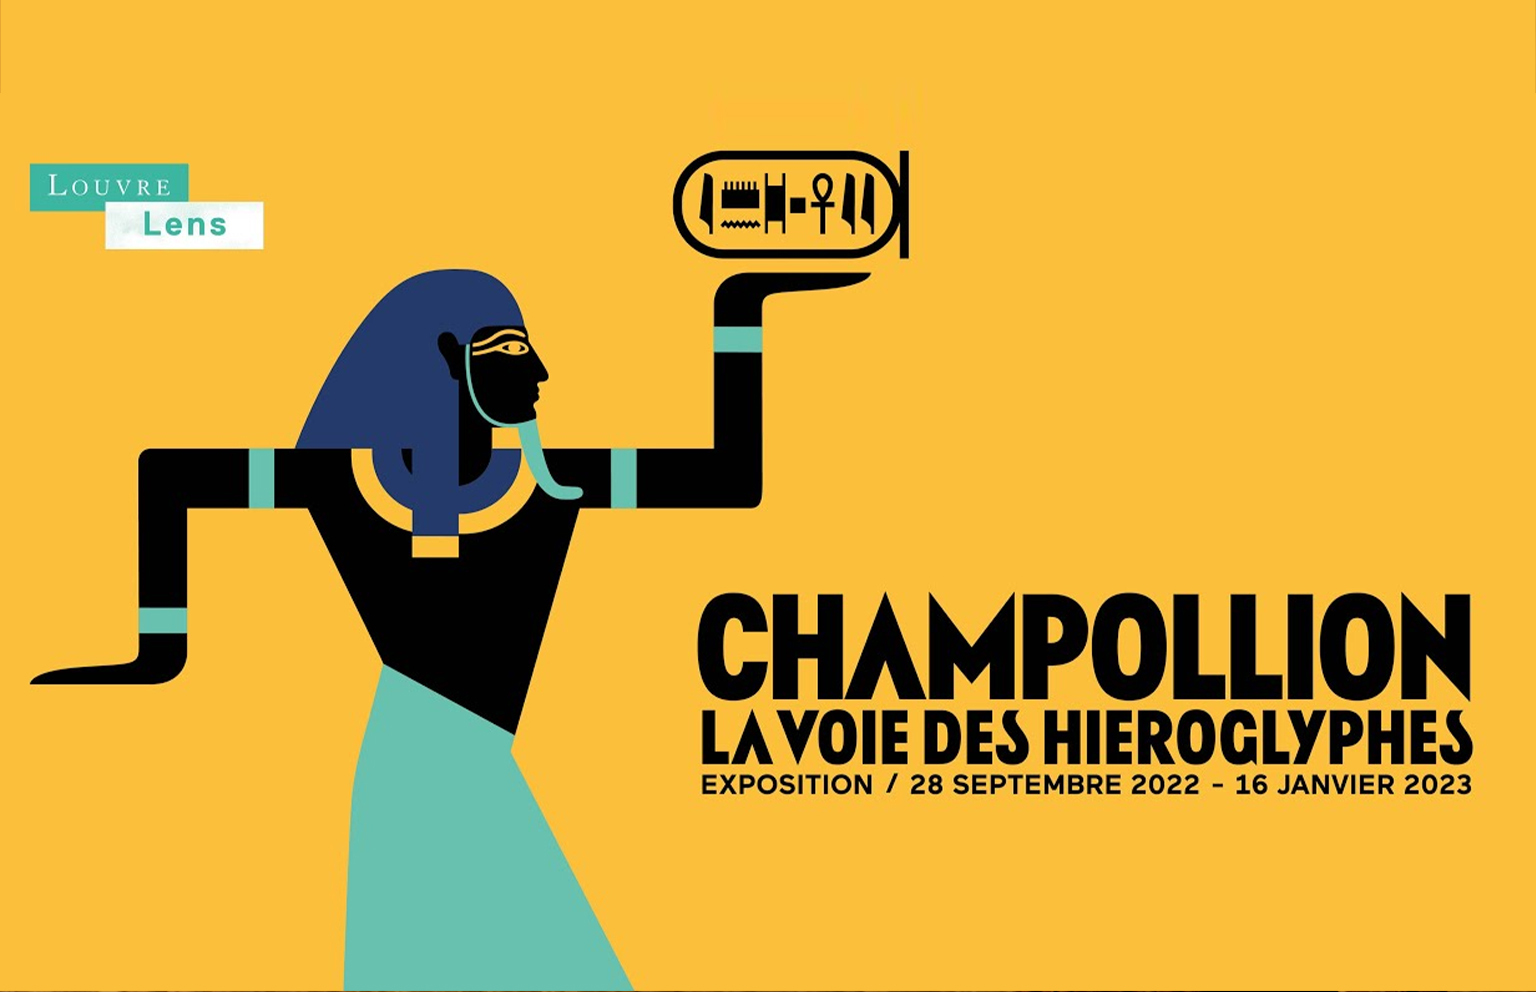 « CHAMPOLLION, the Egyptian » showcased in two prestigious French museums: the Louvre-Lens and the Louvre Museum